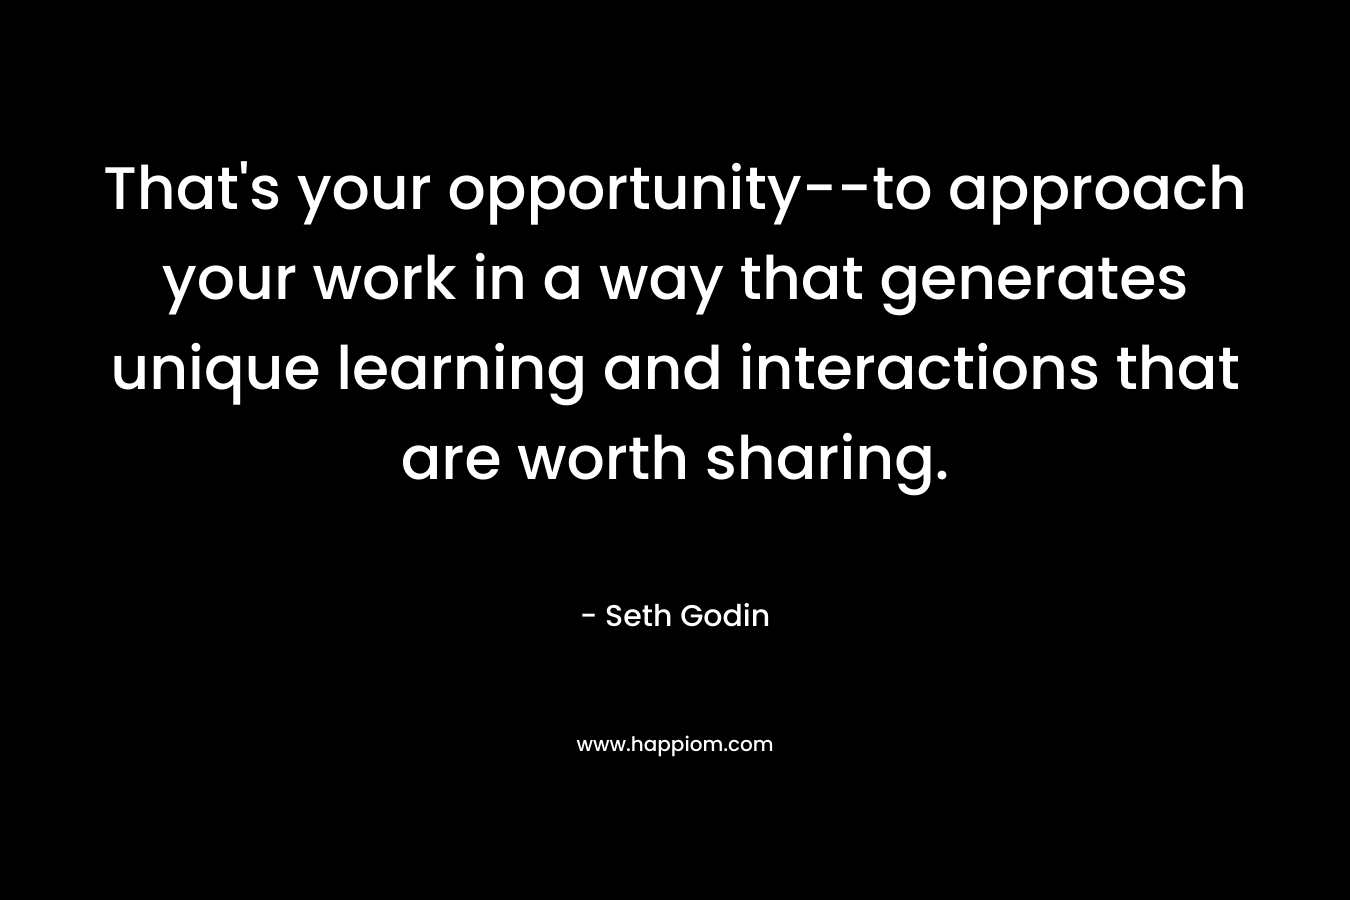 That’s your opportunity–to approach your work in a way that generates unique learning and interactions that are worth sharing. – Seth Godin